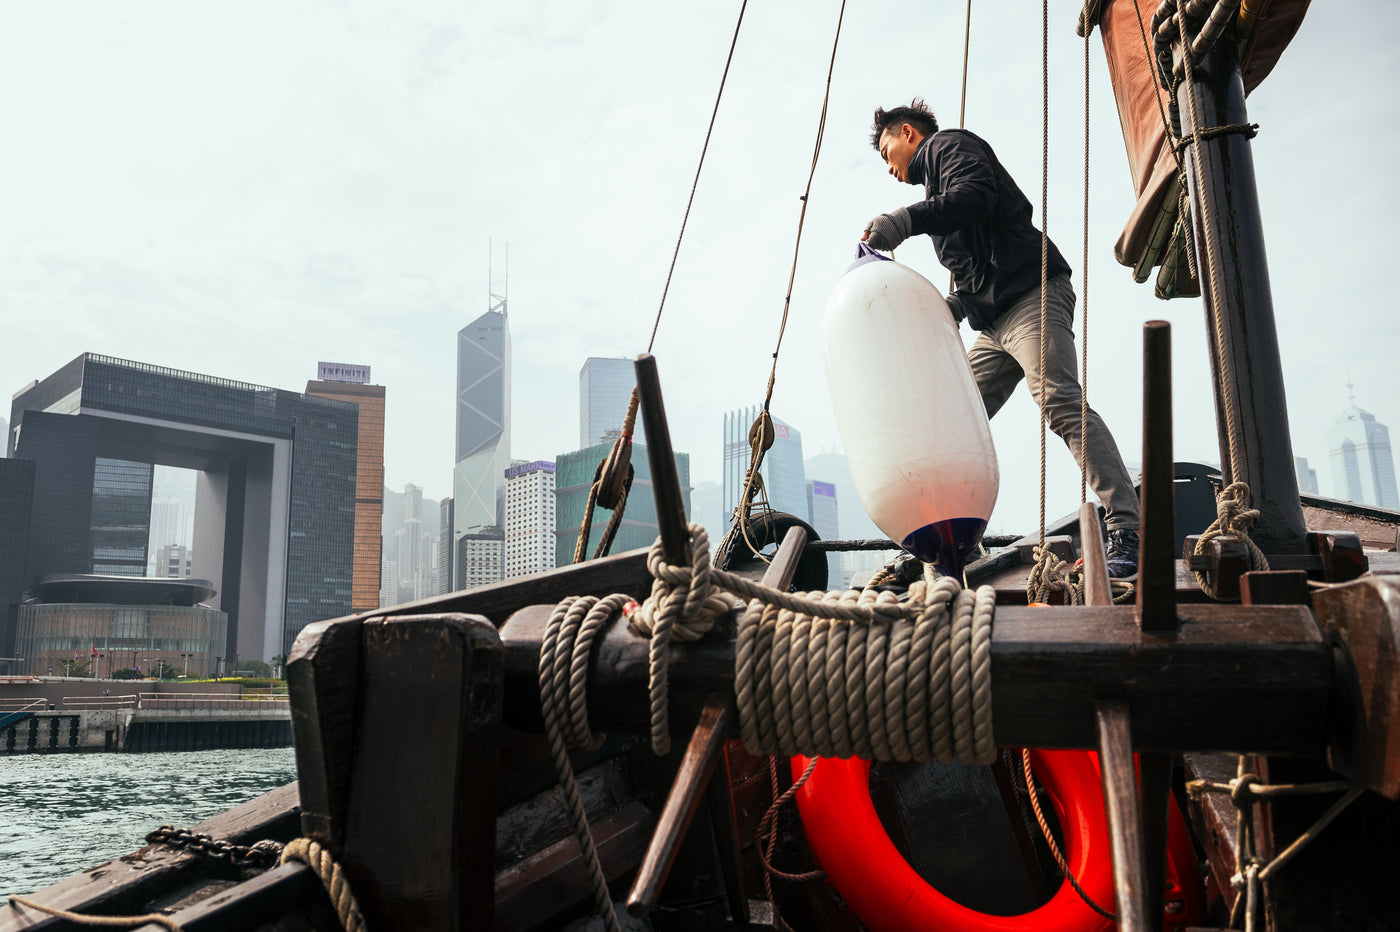 Boat Fender carried by man on Junk Boat in Victoria Harbour, Hong Kong